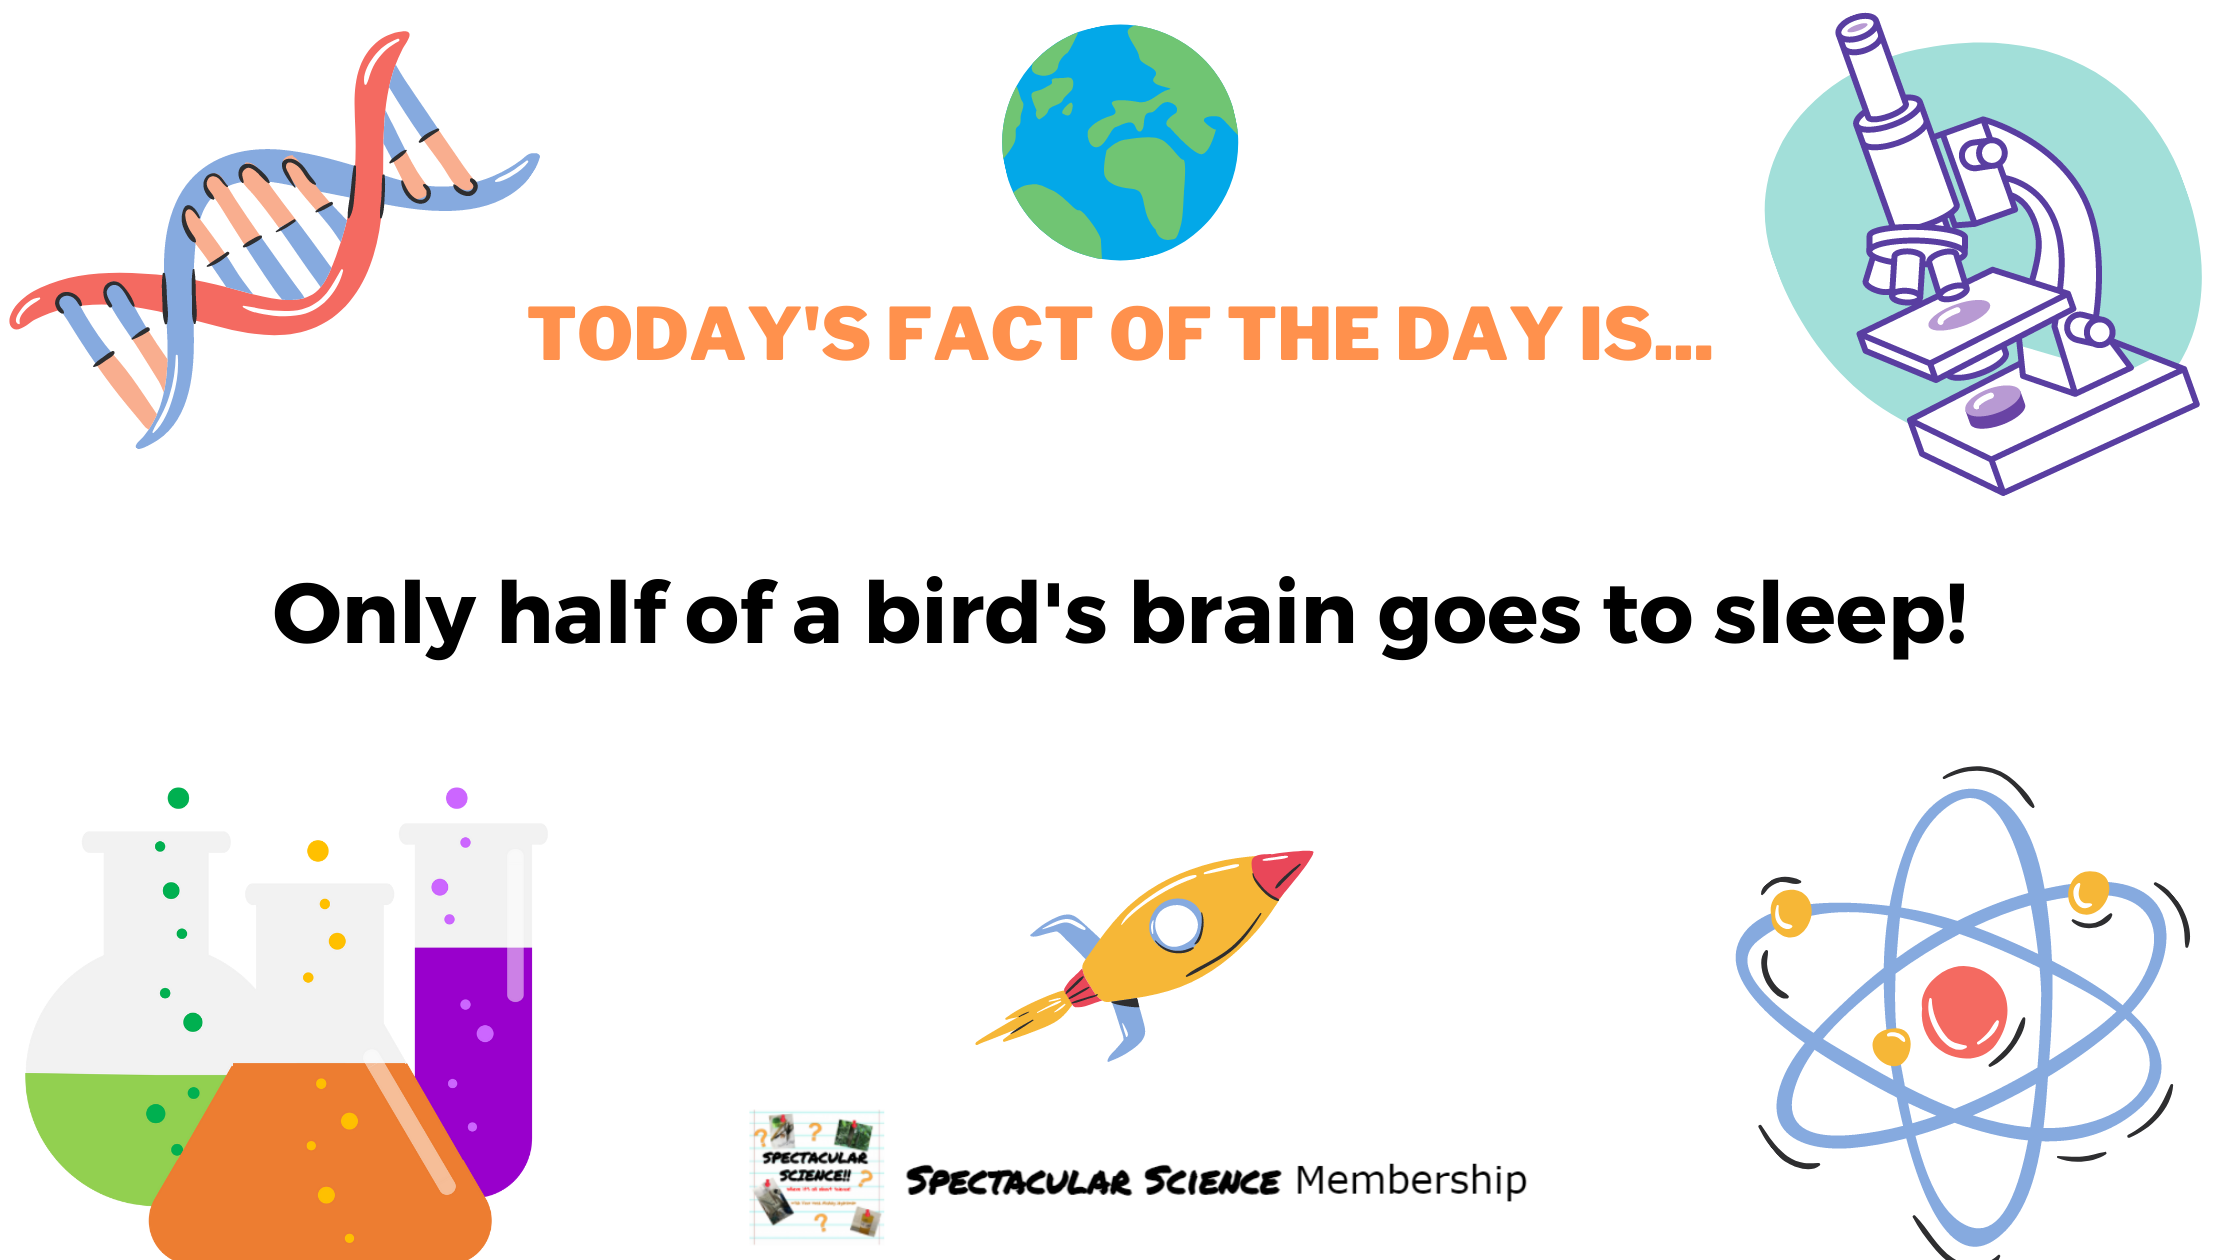 Fact of the Day Image Jan. 5th